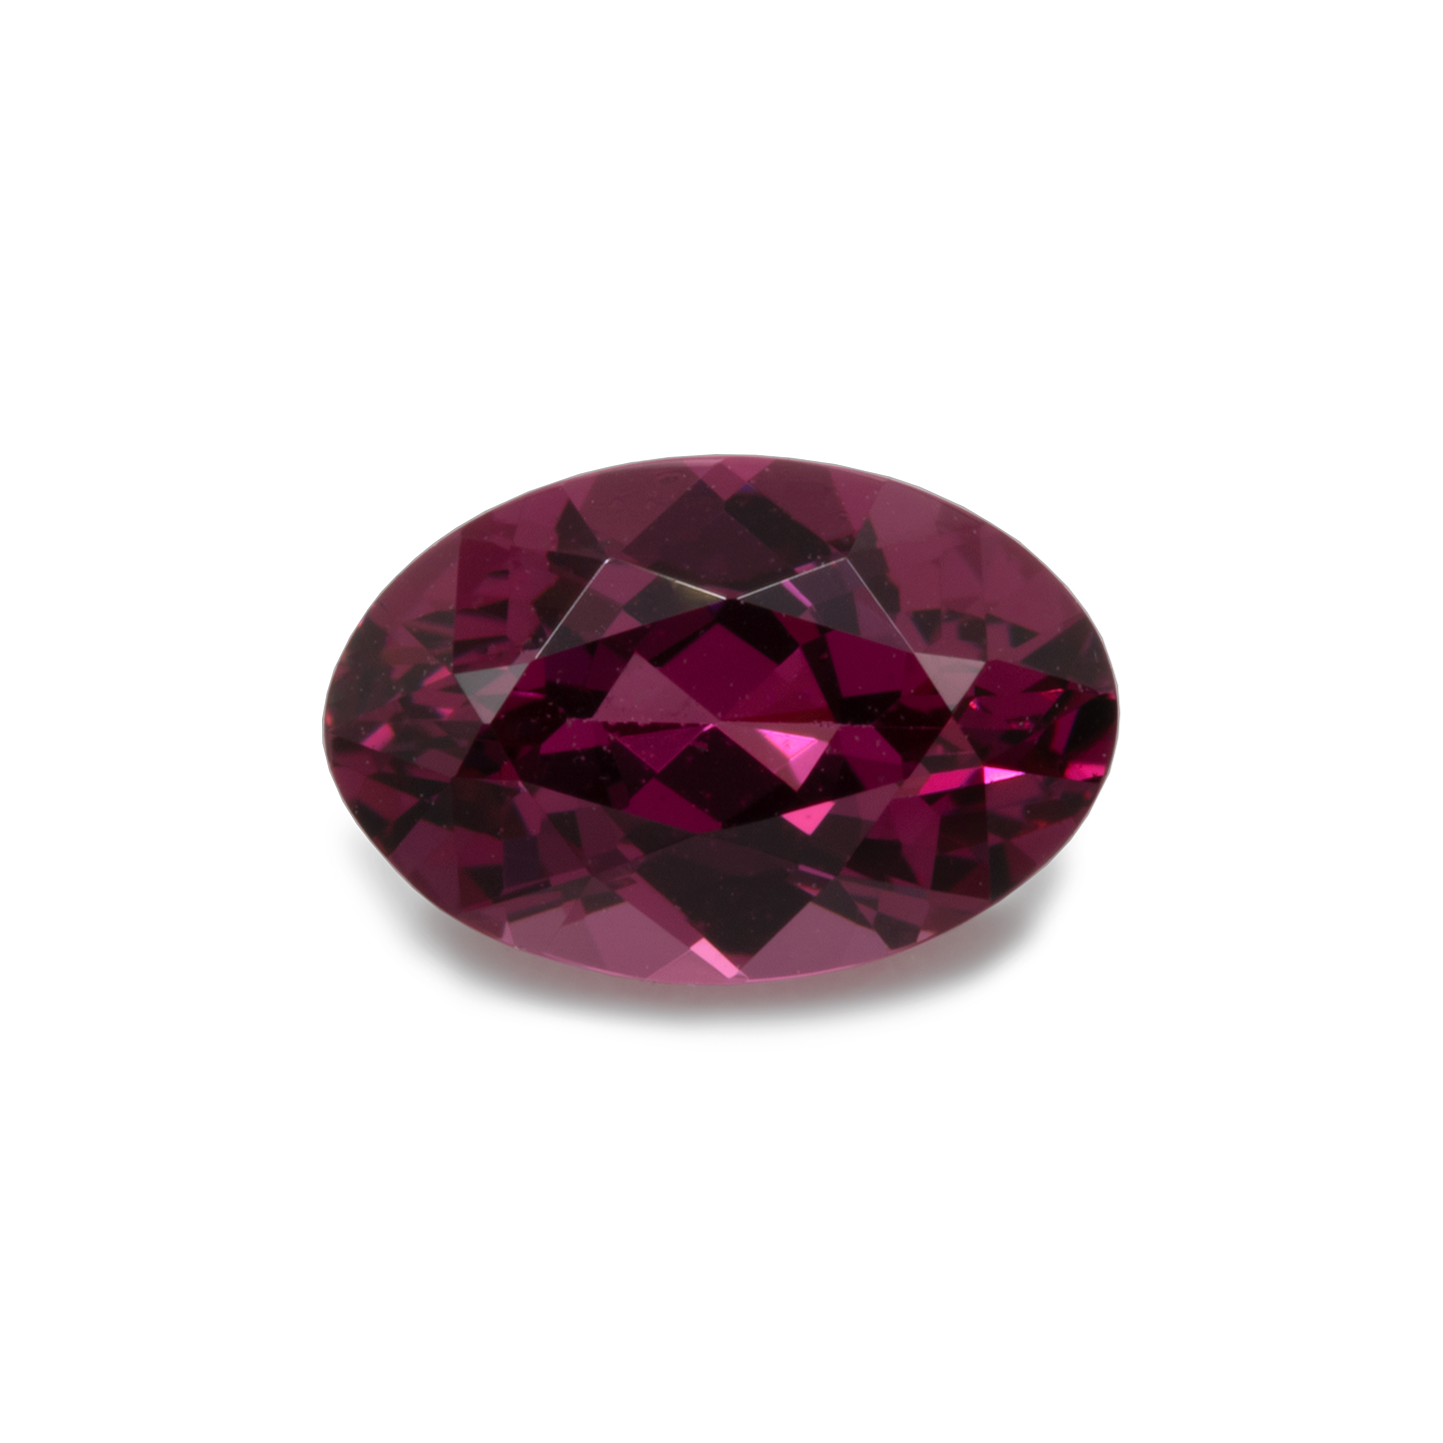 Rhodolith - rot/lila, oval, 6x4 mm, 0,48-0,56 cts, Nr. RD30001